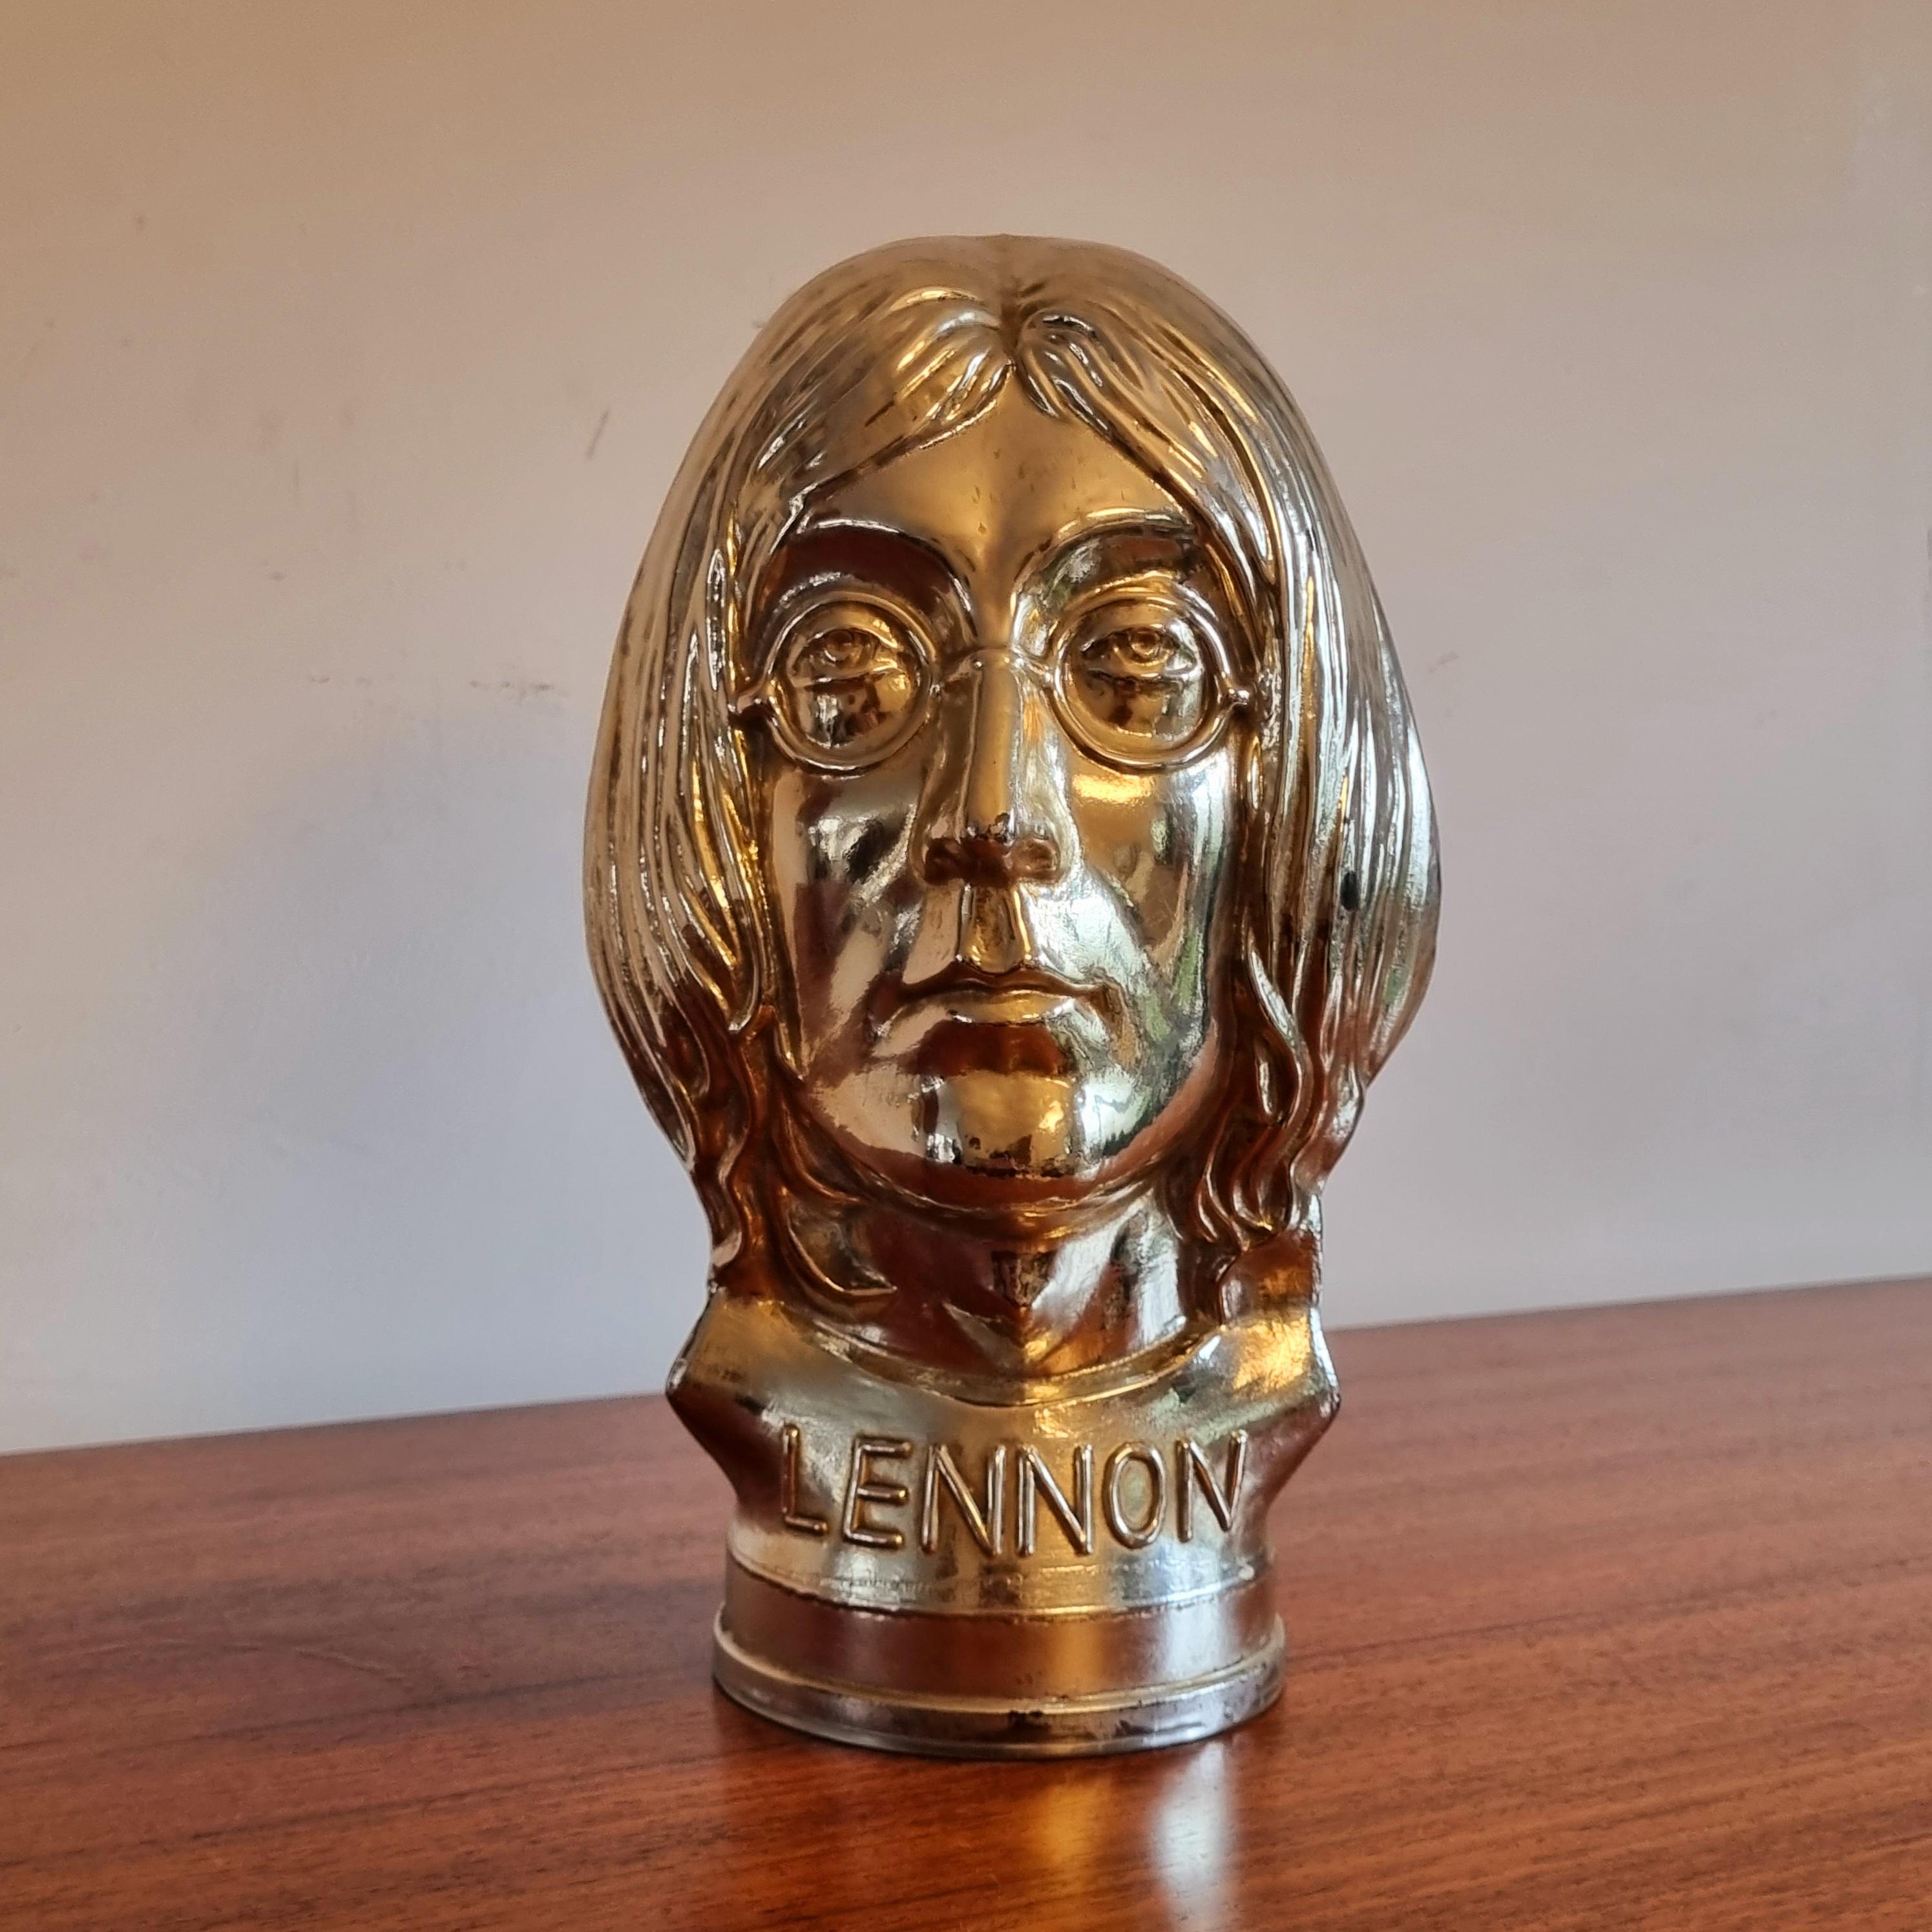 A cool John Lennon glass head
that was made in England in 1969.
This is a head made of glass of John Lennon from The Beatles. On the bottom front, you can read LENNON and on the bottom back, THE BEATLES.It's such a piece of art: every detail of